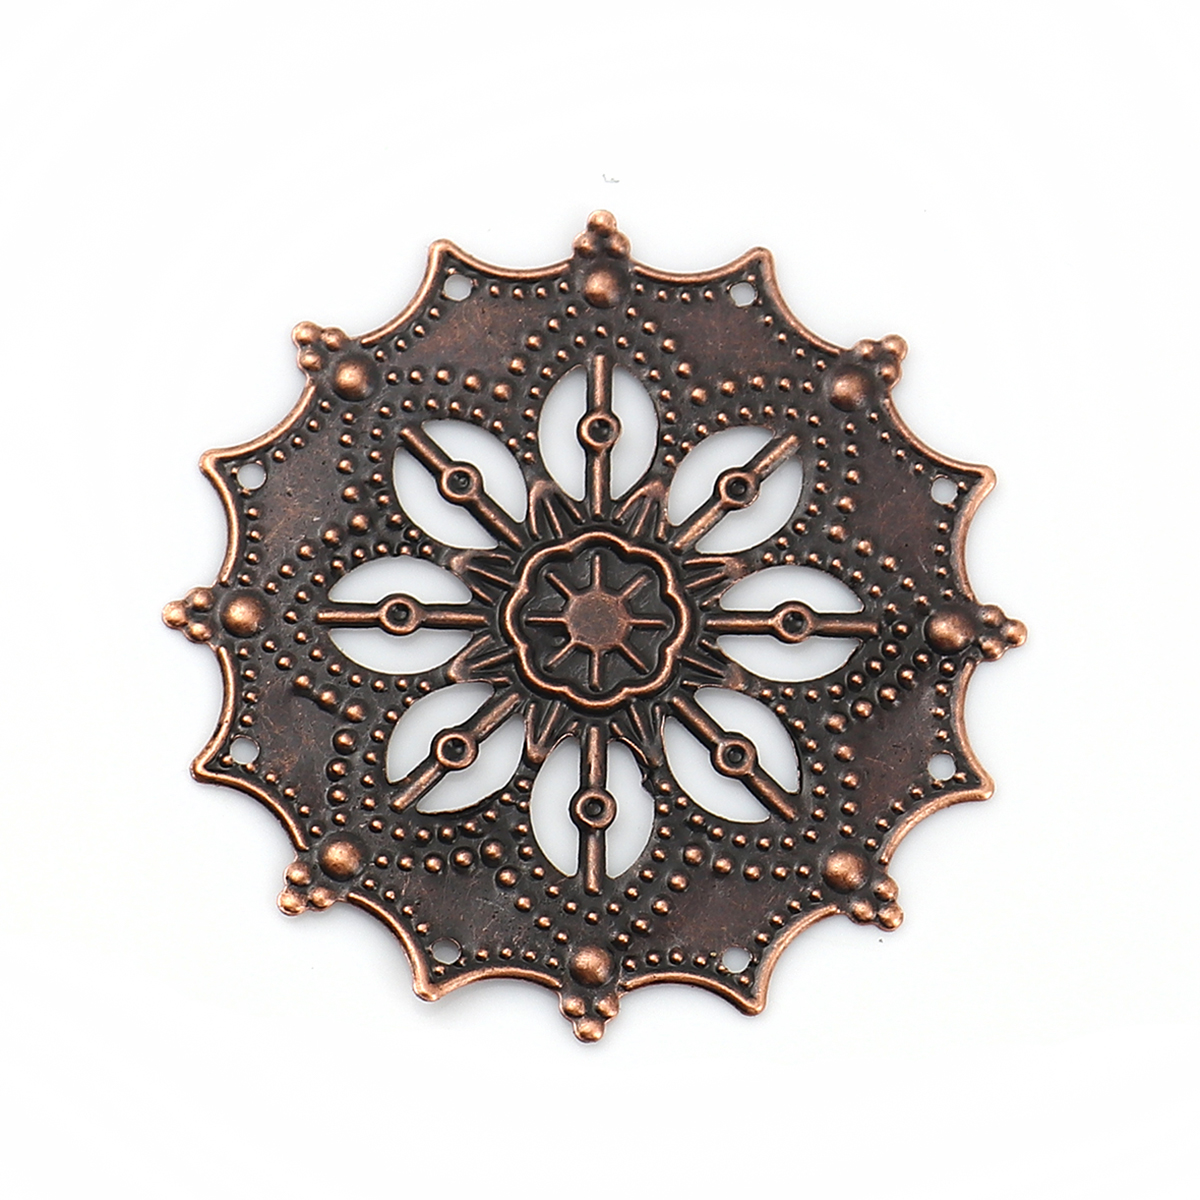 Picture of Iron Based Alloy Filigree Stamping Embellishments Round Antique Copper Flower 43mm(1 6/8") x 43mm(1 6/8"), 50 PCs